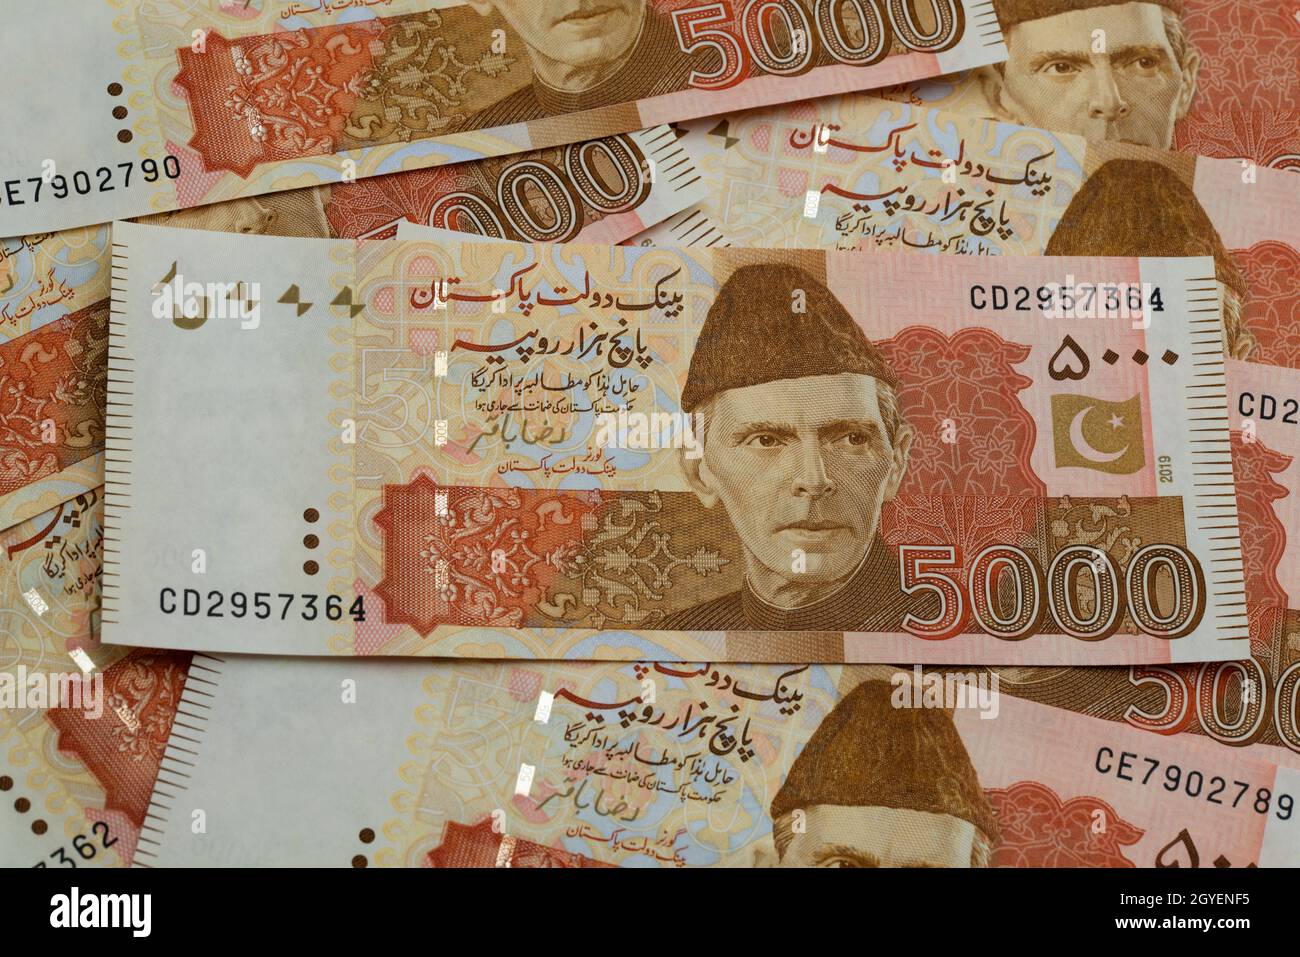 Pakistani Rupees, Pakistani currency notes, 5000 Rupees Stock Photo